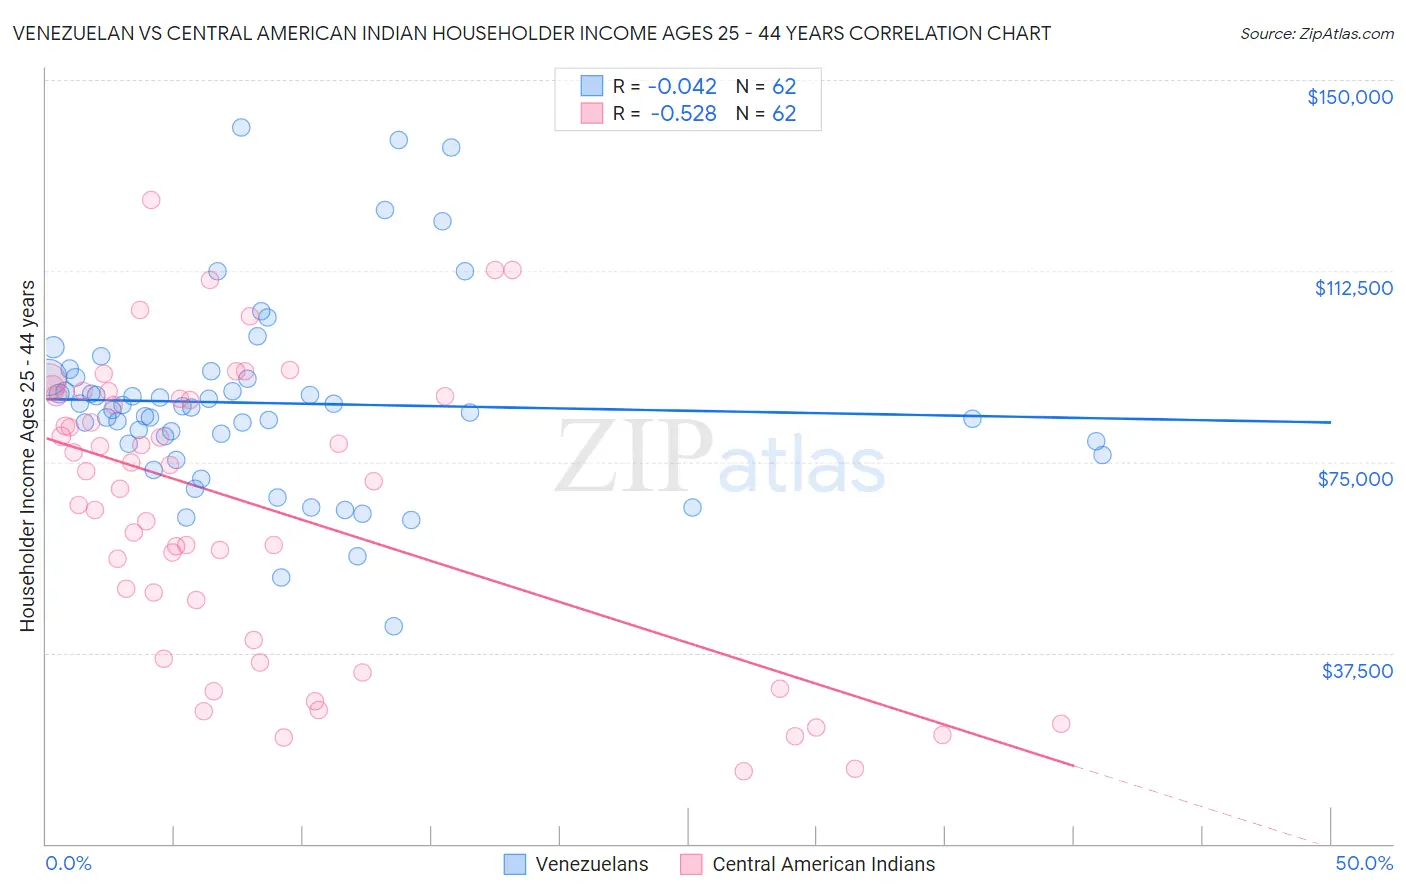 Venezuelan vs Central American Indian Householder Income Ages 25 - 44 years